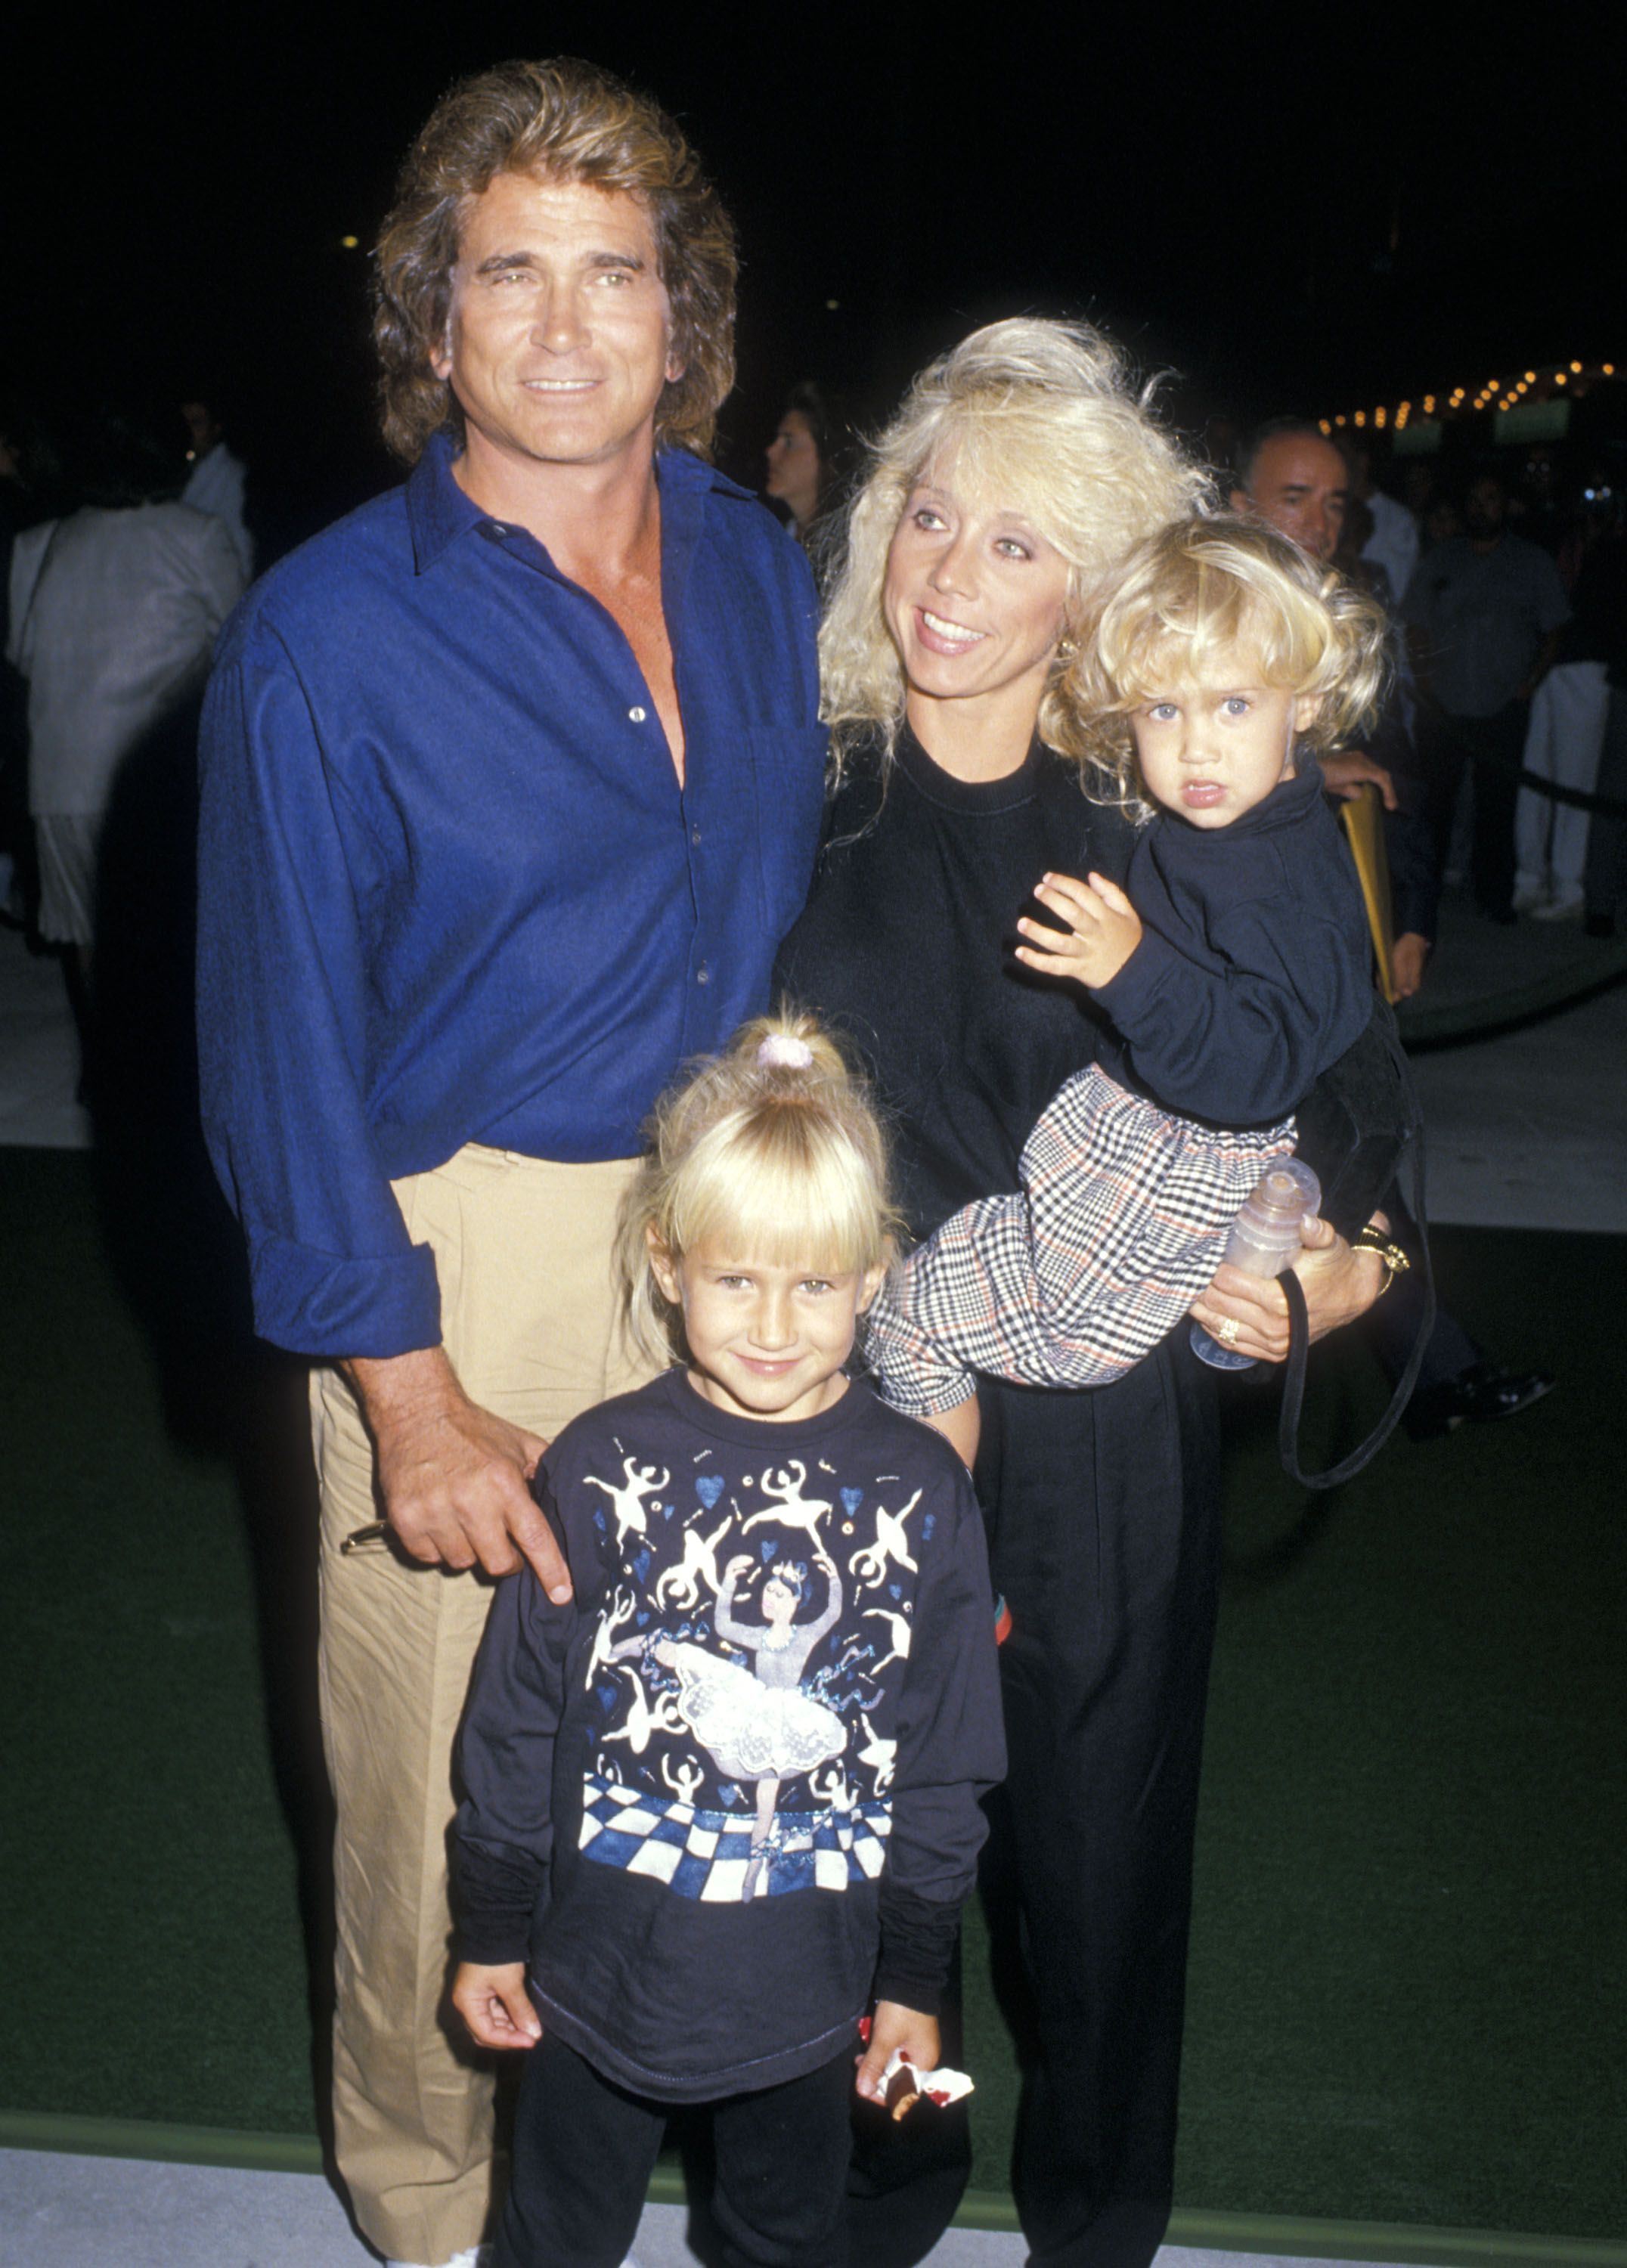 Michael, Cindy, Jennifer, and Sean Landon at the "Gorillas in the Mist: The Story of Dian Fossey" Universal City Premiere on September 19, 1988, in California. | Source: Ron Galella/Ron Galella Collection/Getty Images